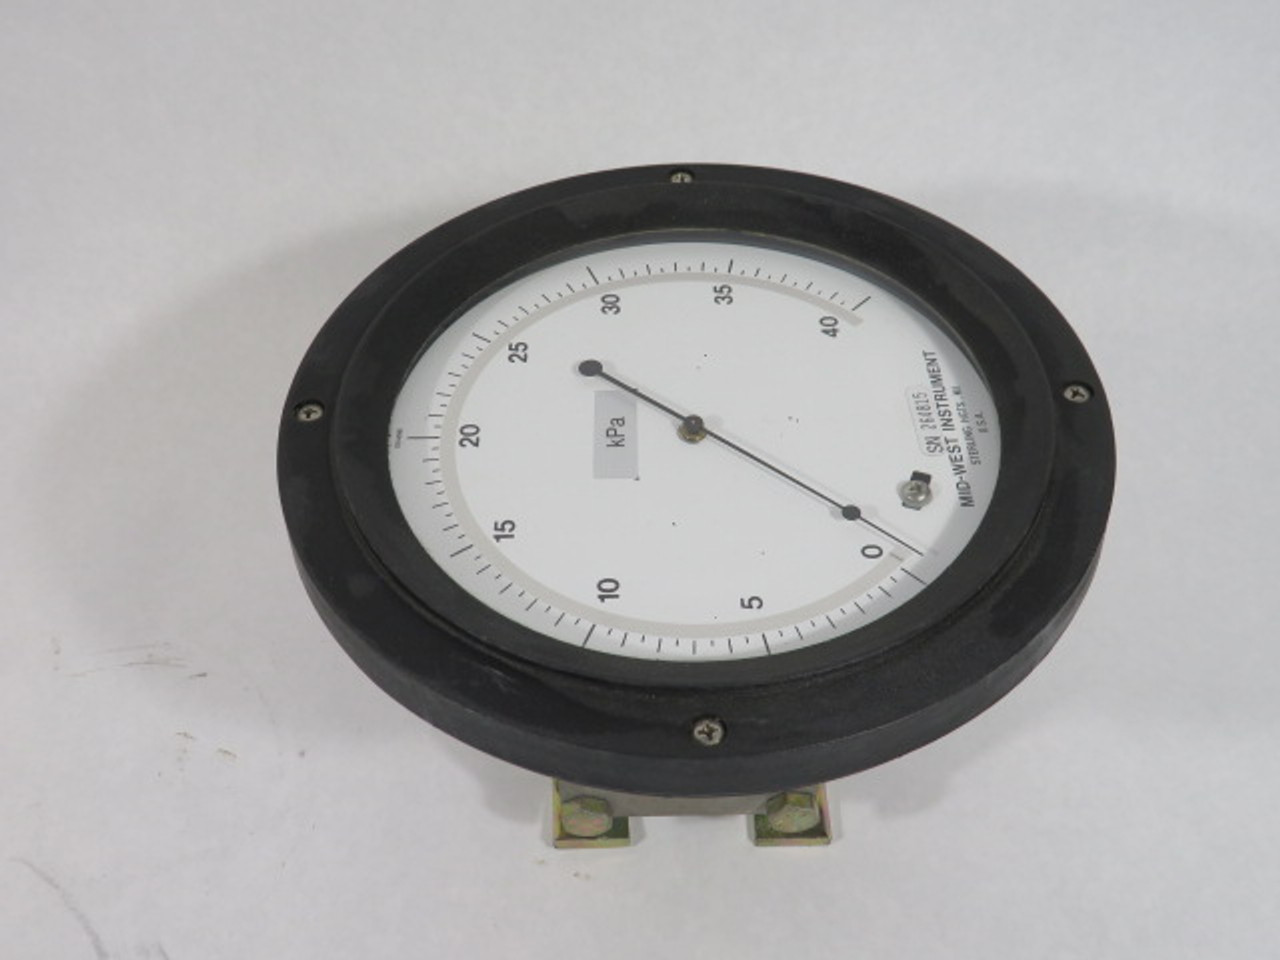 Midwest 106QE-10-00 Bellows Differential Pressure Gauge 0-40kPa 6"Dia USED